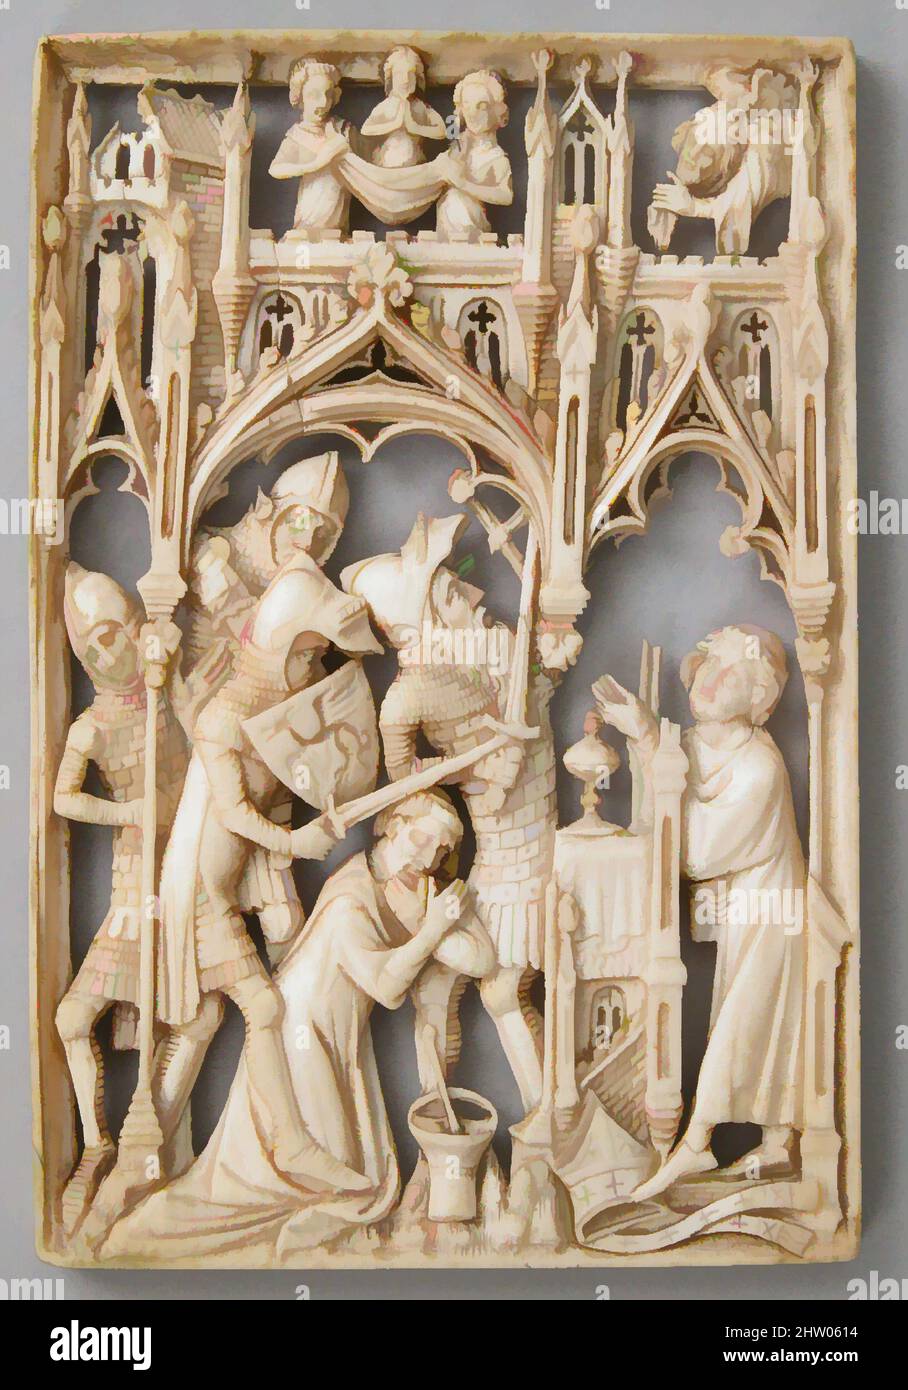 Art inspired by Martyrdom of Thomas à Becket, 1400 (?), British (?), Ivory, Overall: 3 7/16 x 2 5/16 x 1/4 in. (8.7 x 5.8 x 0.6 cm), Ivories, Thomas Becket, archbishop of Canterbury from 1162 to 1170, is perhaps best known for his struggles with King Henry II of England over the, Classic works modernized by Artotop with a splash of modernity. Shapes, color and value, eye-catching visual impact on art. Emotions through freedom of artworks in a contemporary way. A timeless message pursuing a wildly creative new direction. Artists turning to the digital medium and creating the Artotop NFT Stock Photo